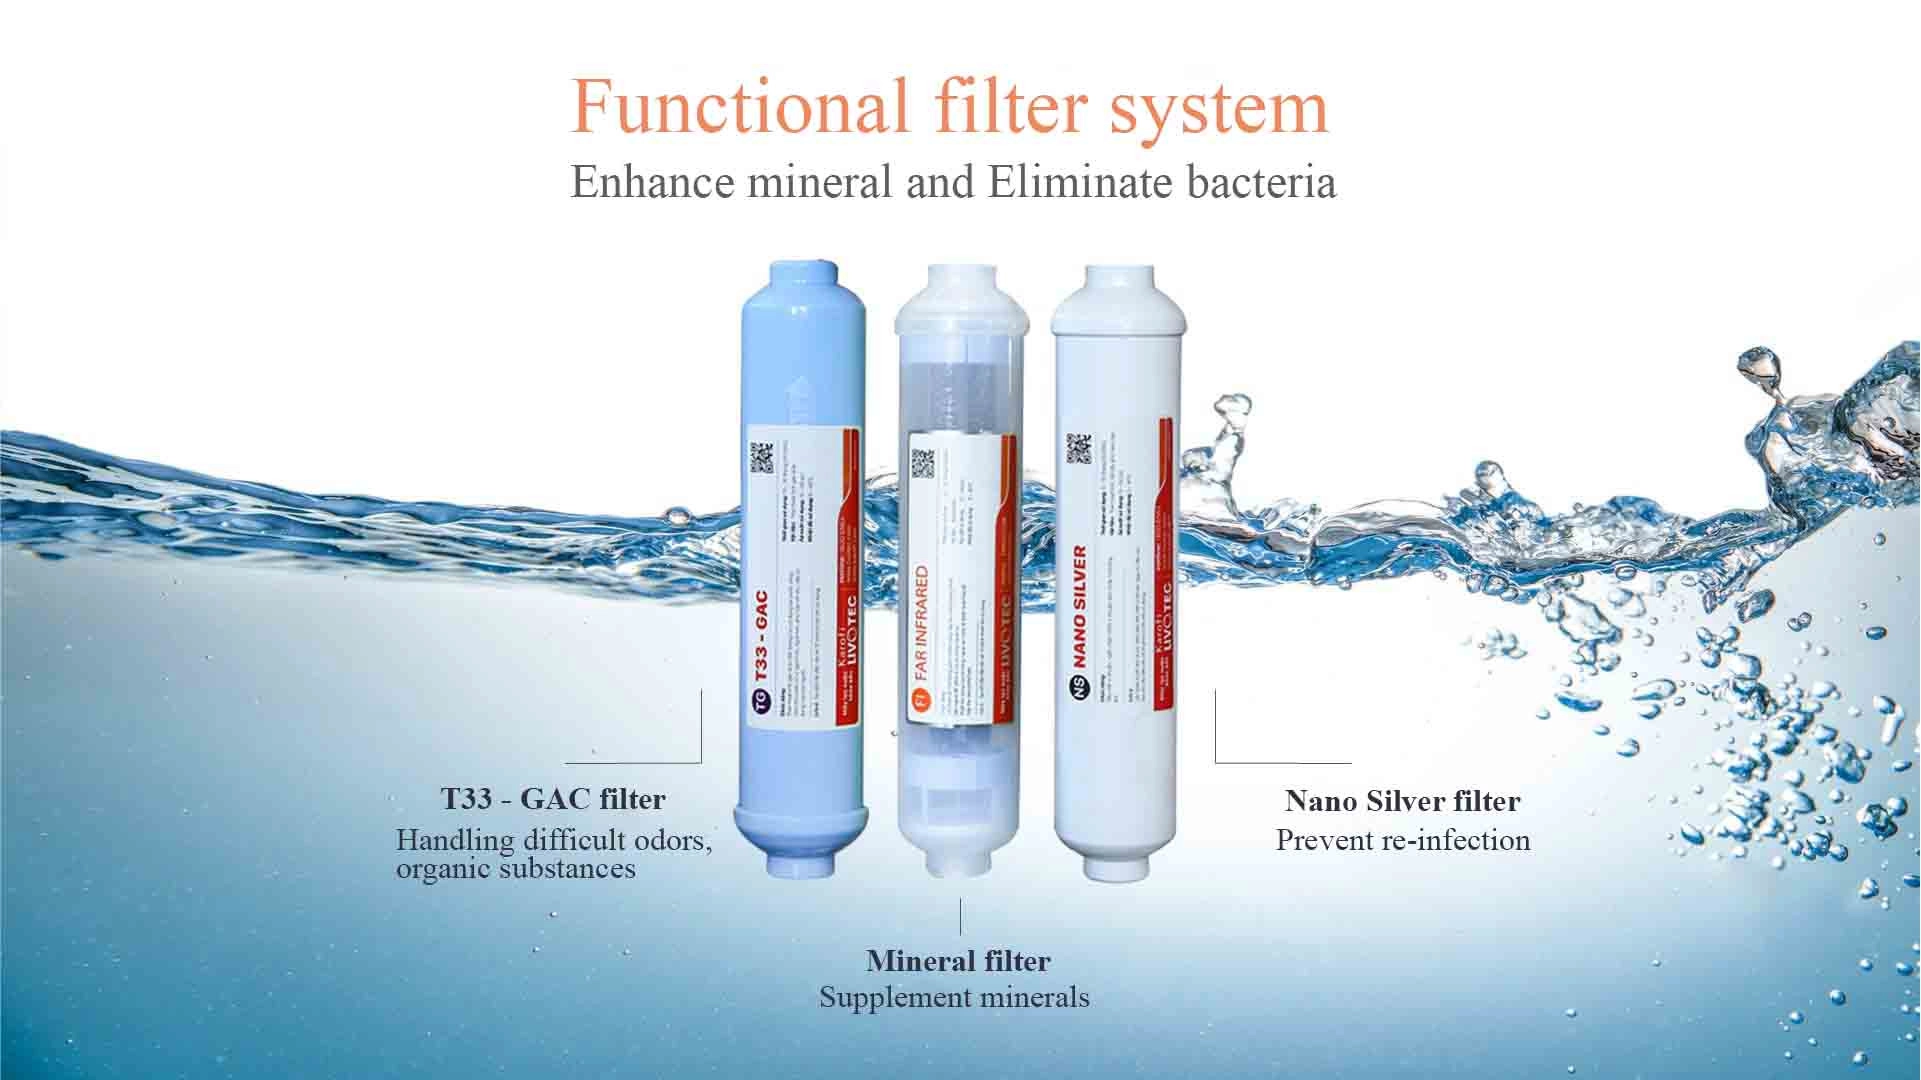 Functional filtration system